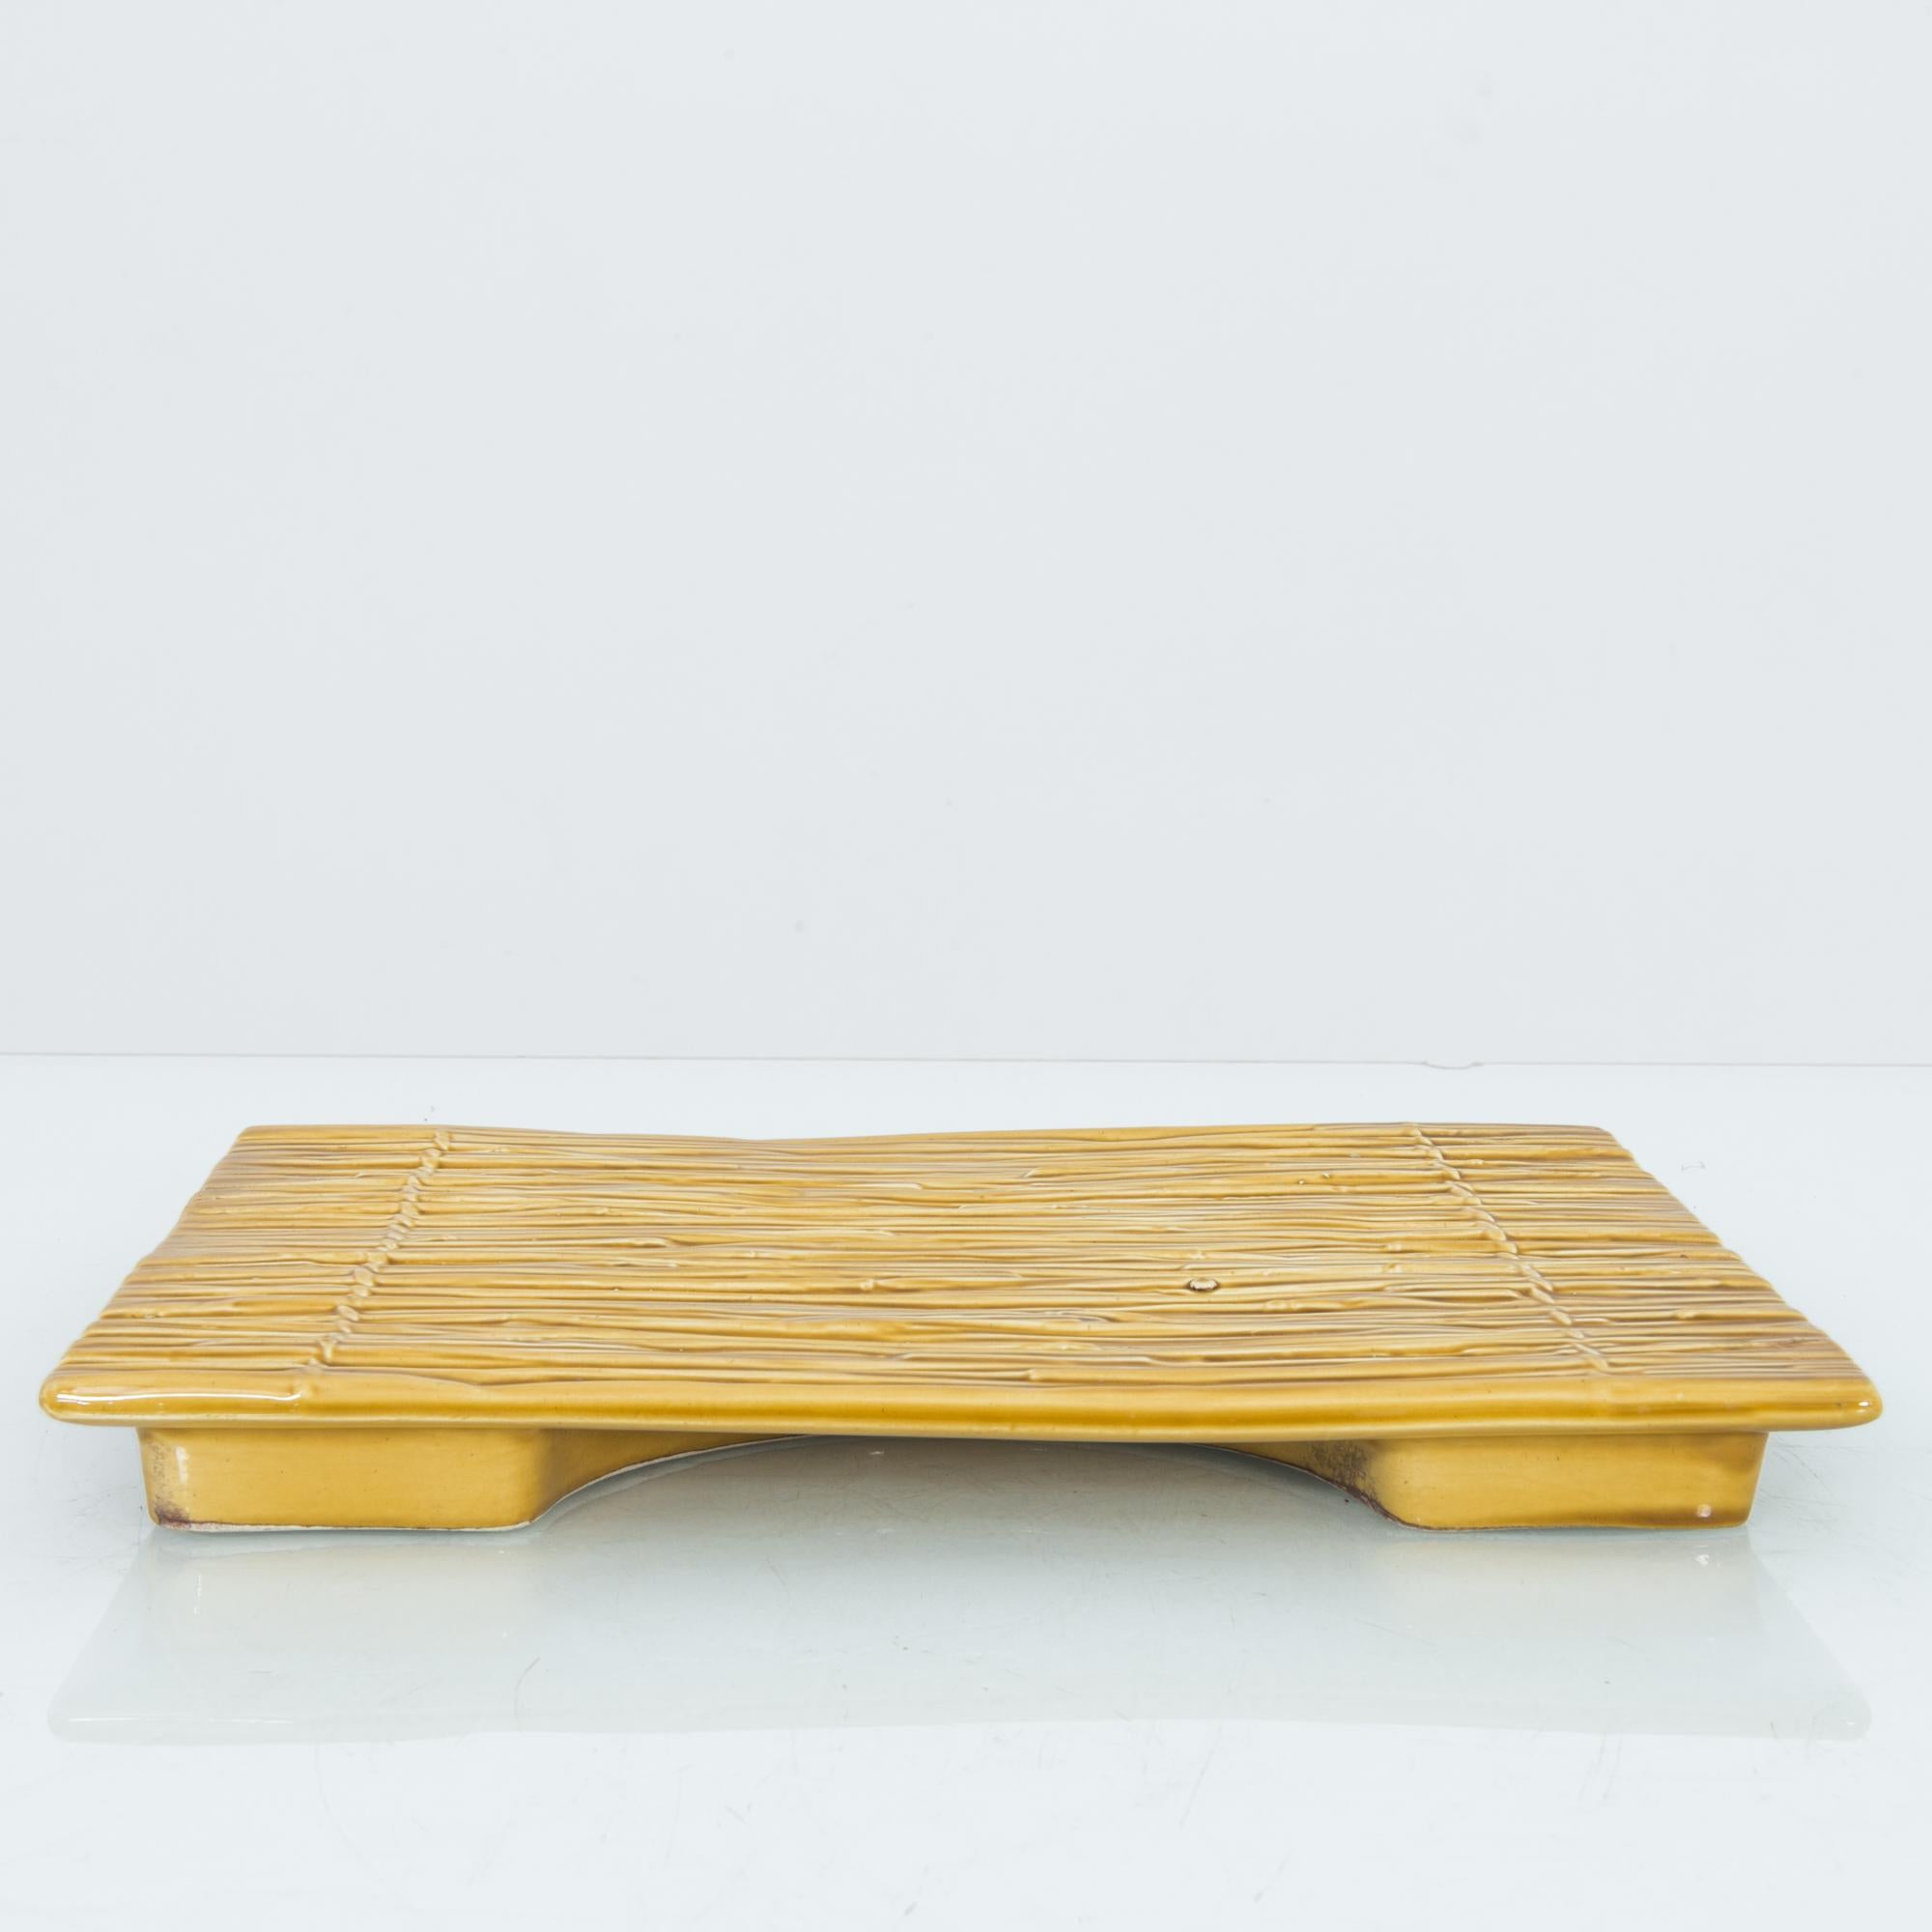 A ceramic tray from Belgium, circa 1950. The tray is glazed yellow in the style of a bamboo mat on a small platform. A glorious bit of kitsch, exuding color and character.